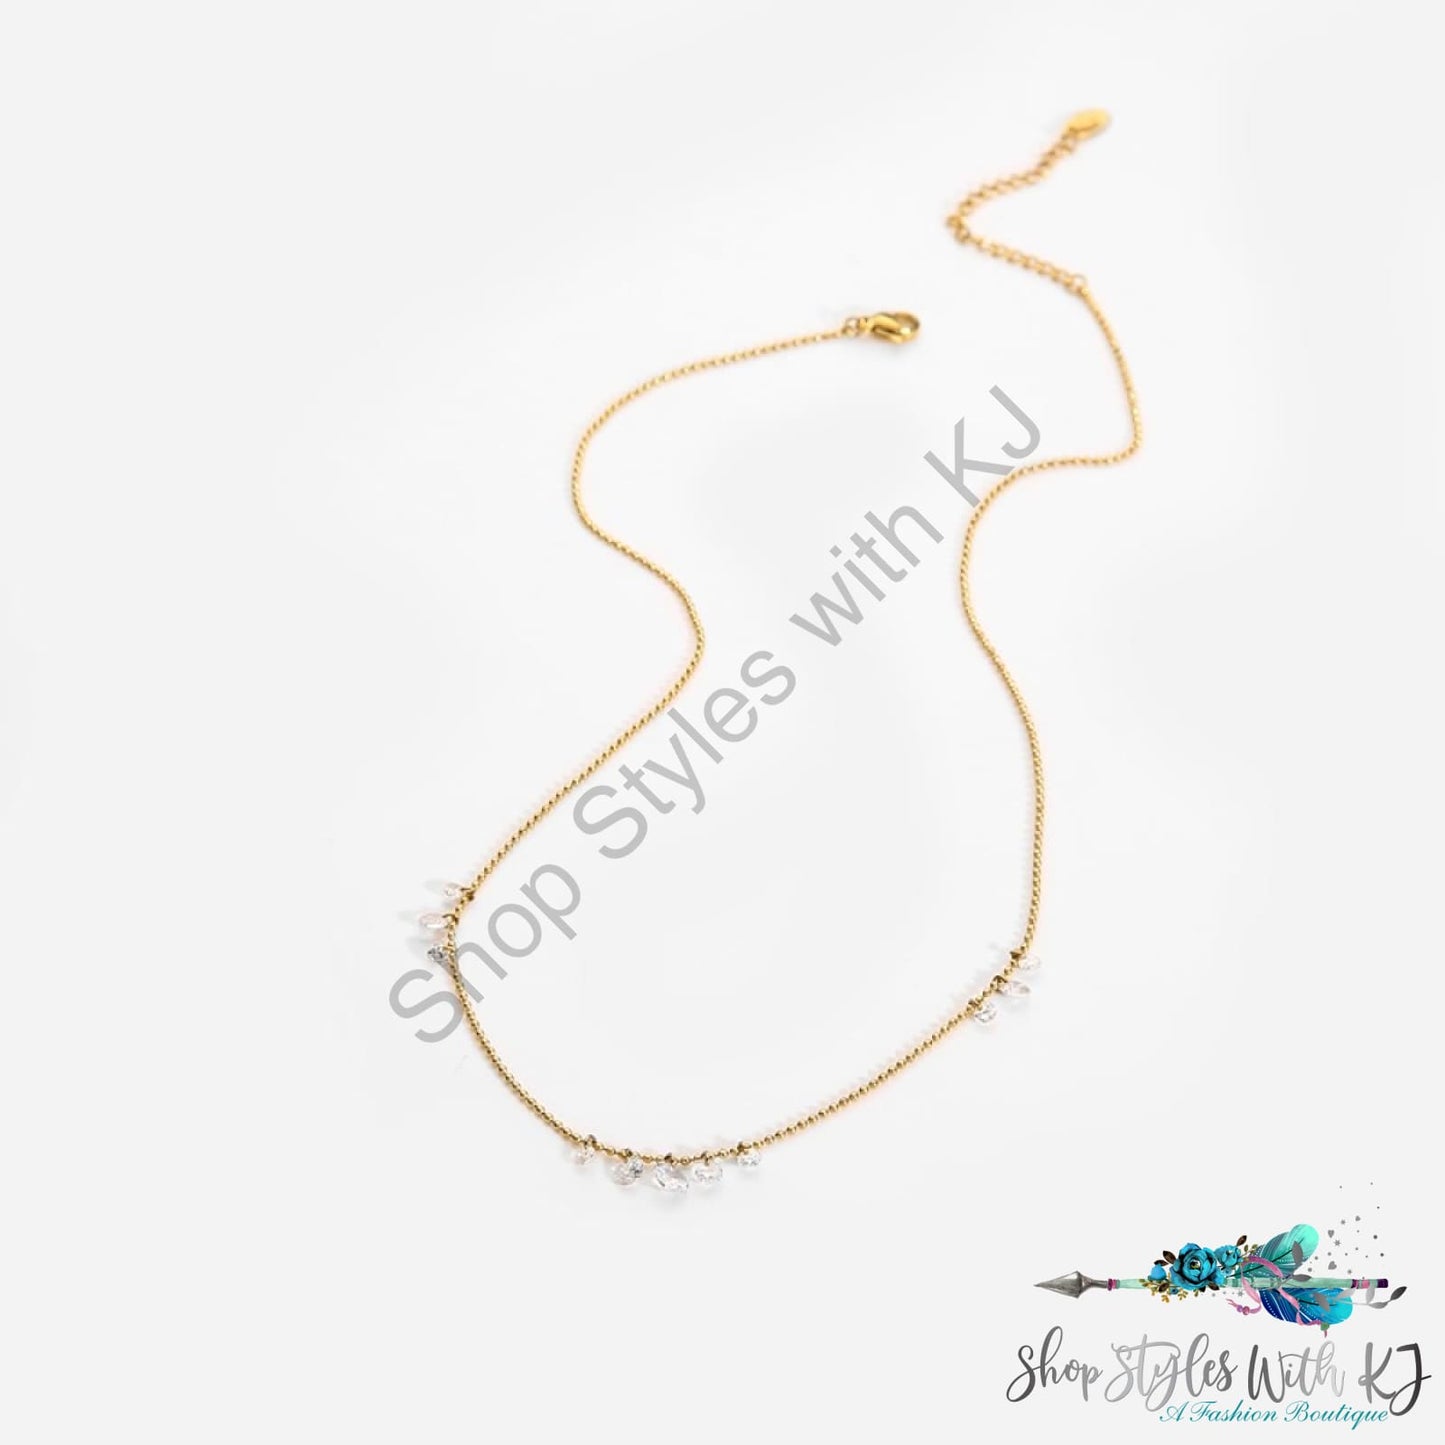 Stainless Steel 18K Gold Plated Zirconia Charm Necklace